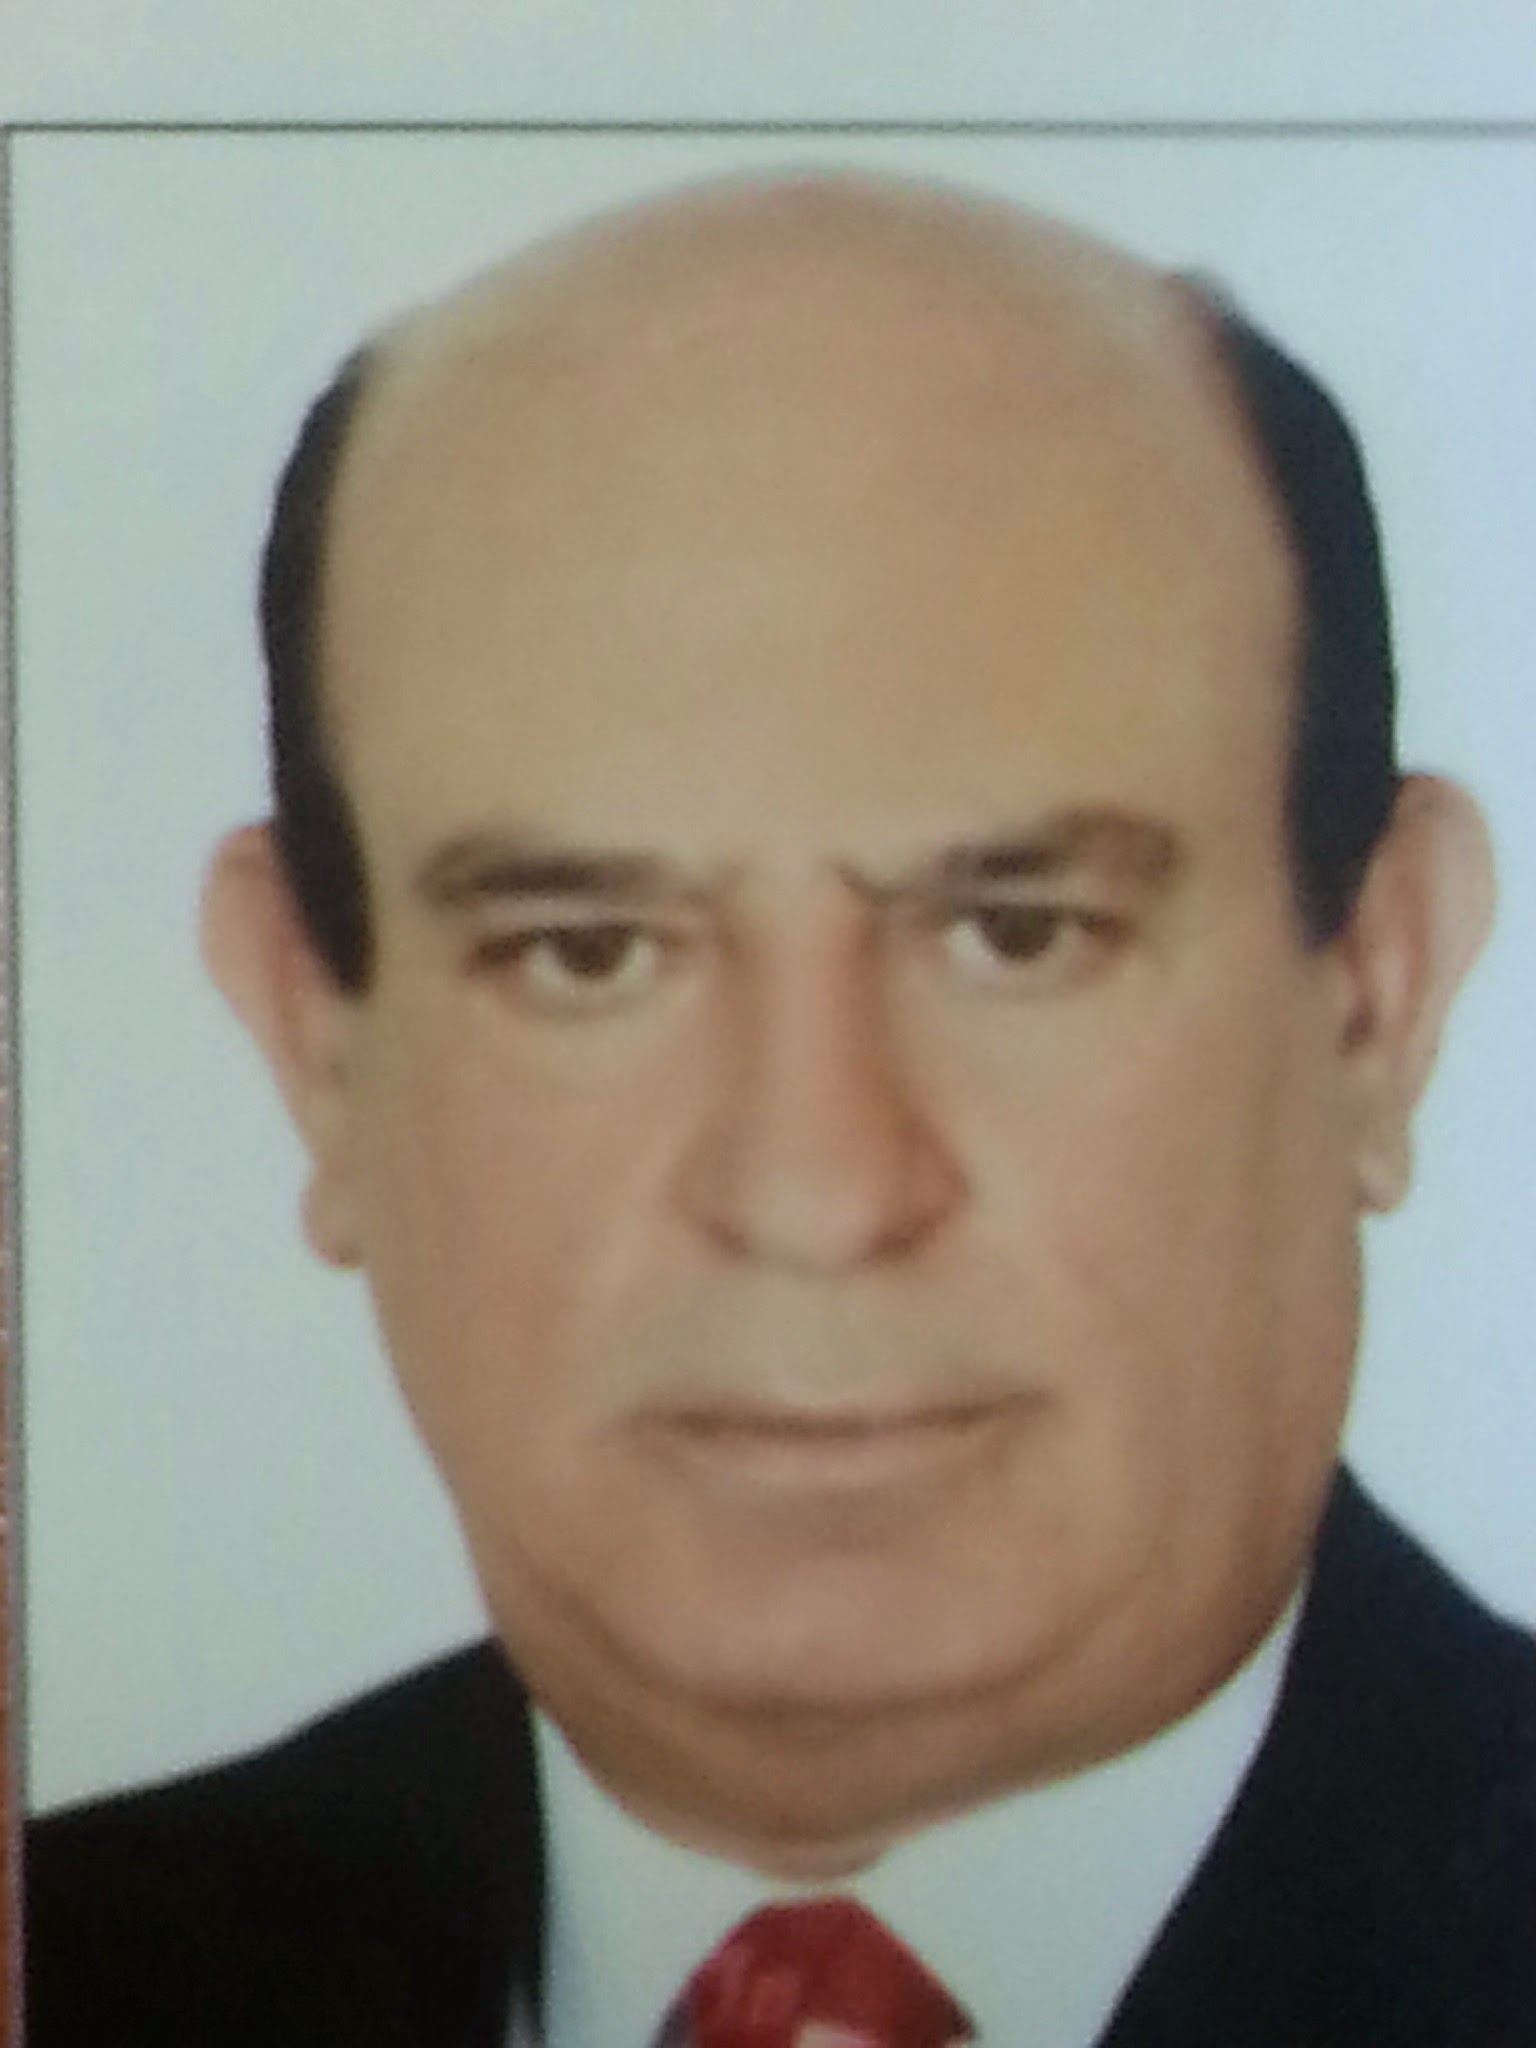 Profile picture of Dr. Adel Jibril Mahmoud